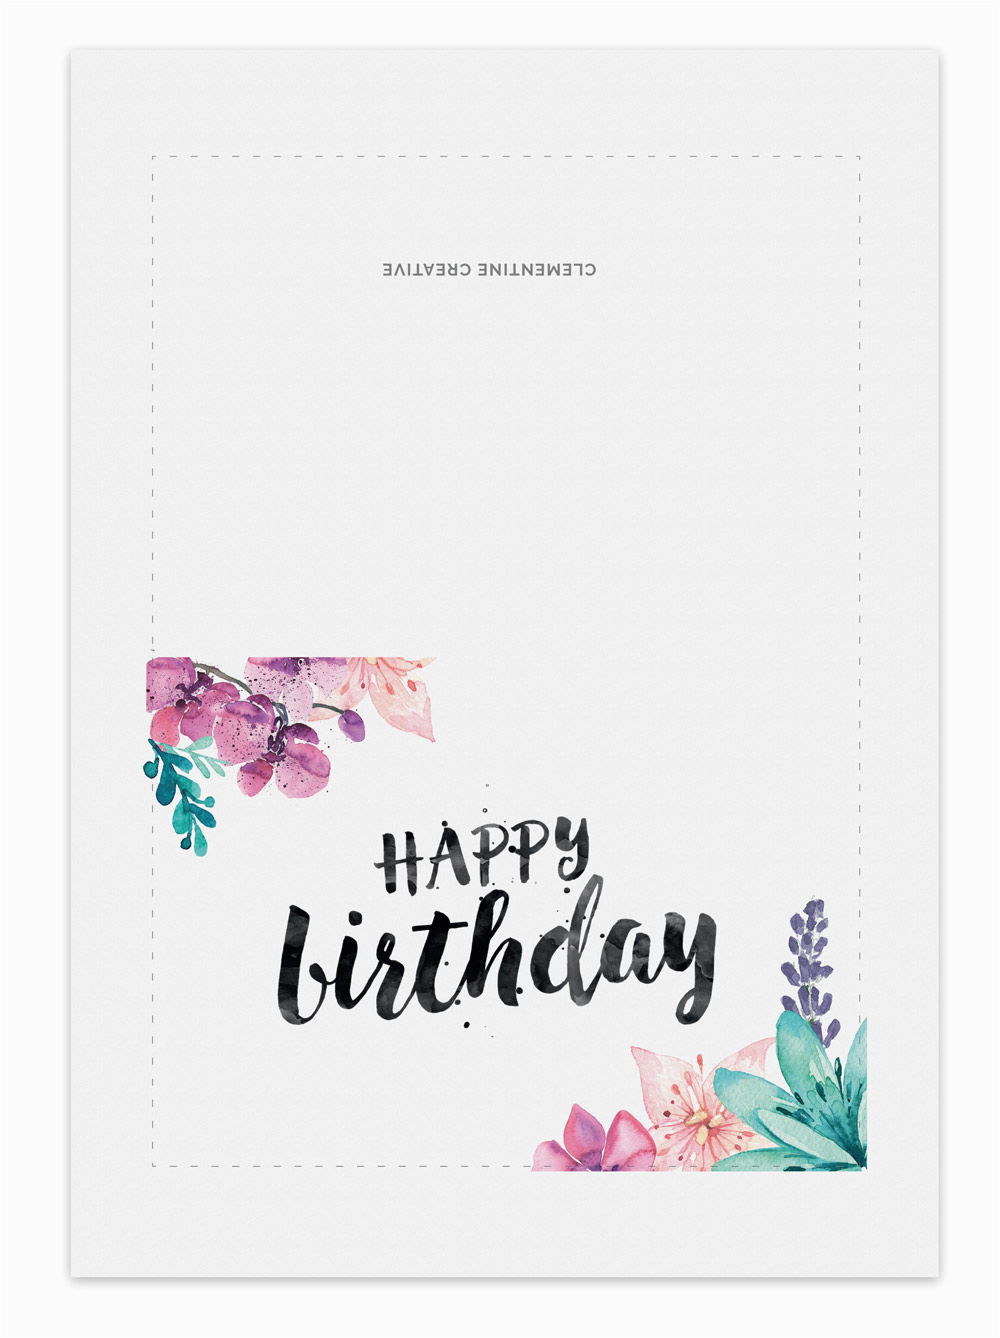 Print Out A Birthday Card Printable Birthday Card For Her 